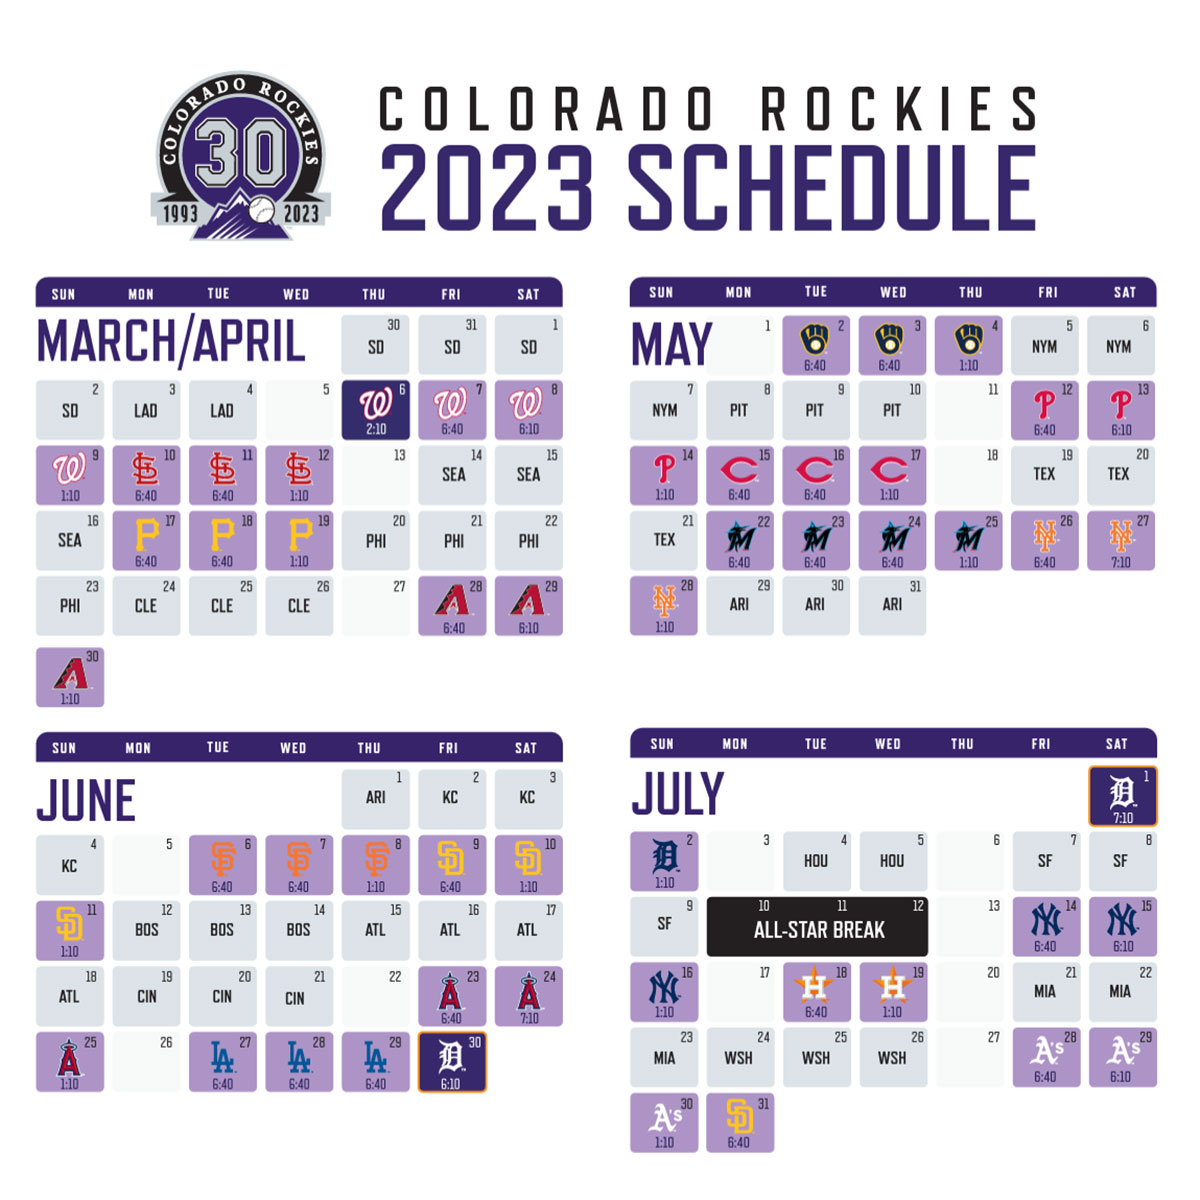 watch colorado rockies without cable